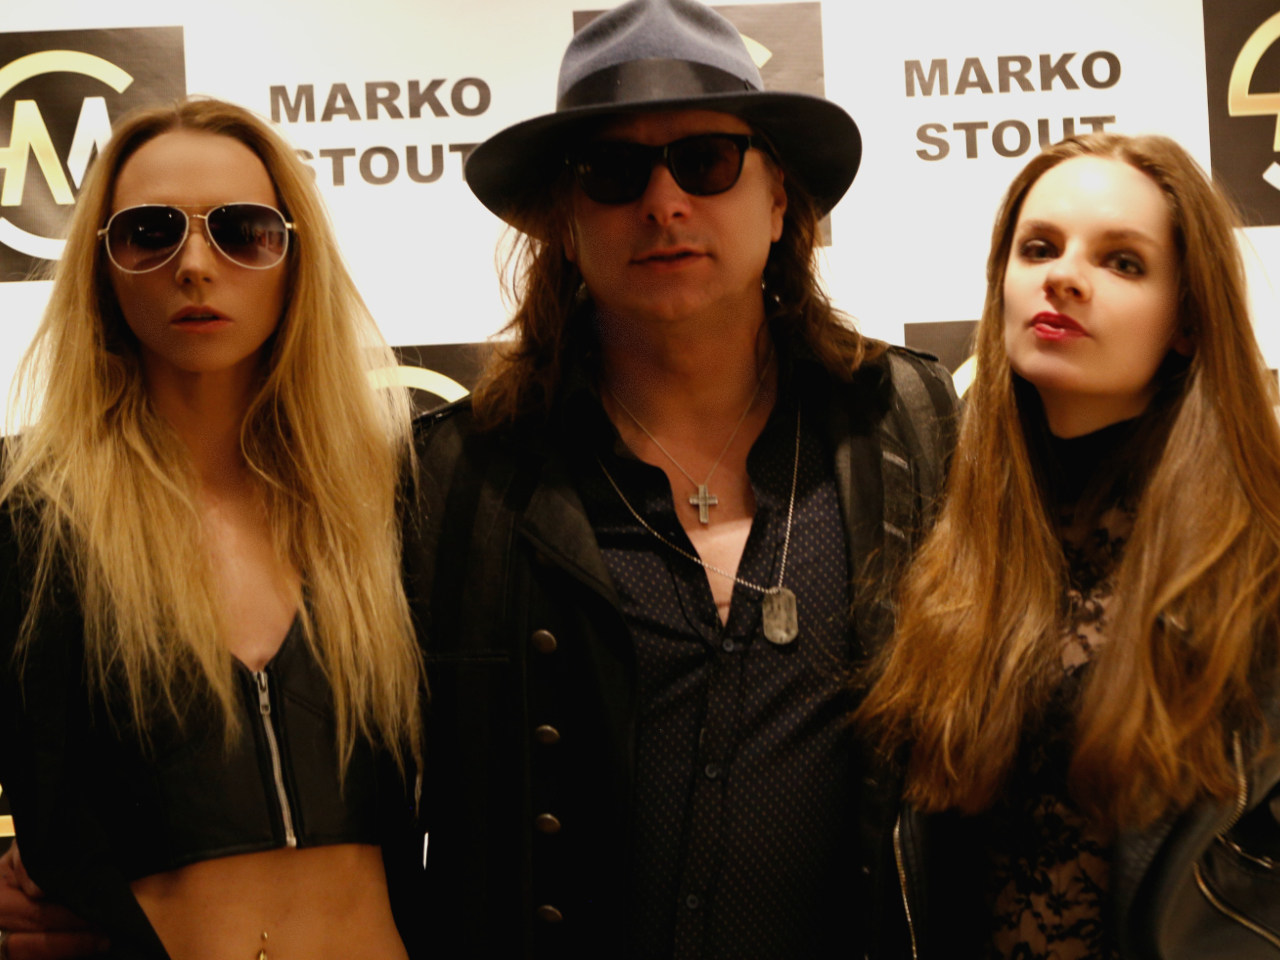 Marko Stout poses with models at his Artifact Gallery exhibition 03/04/18